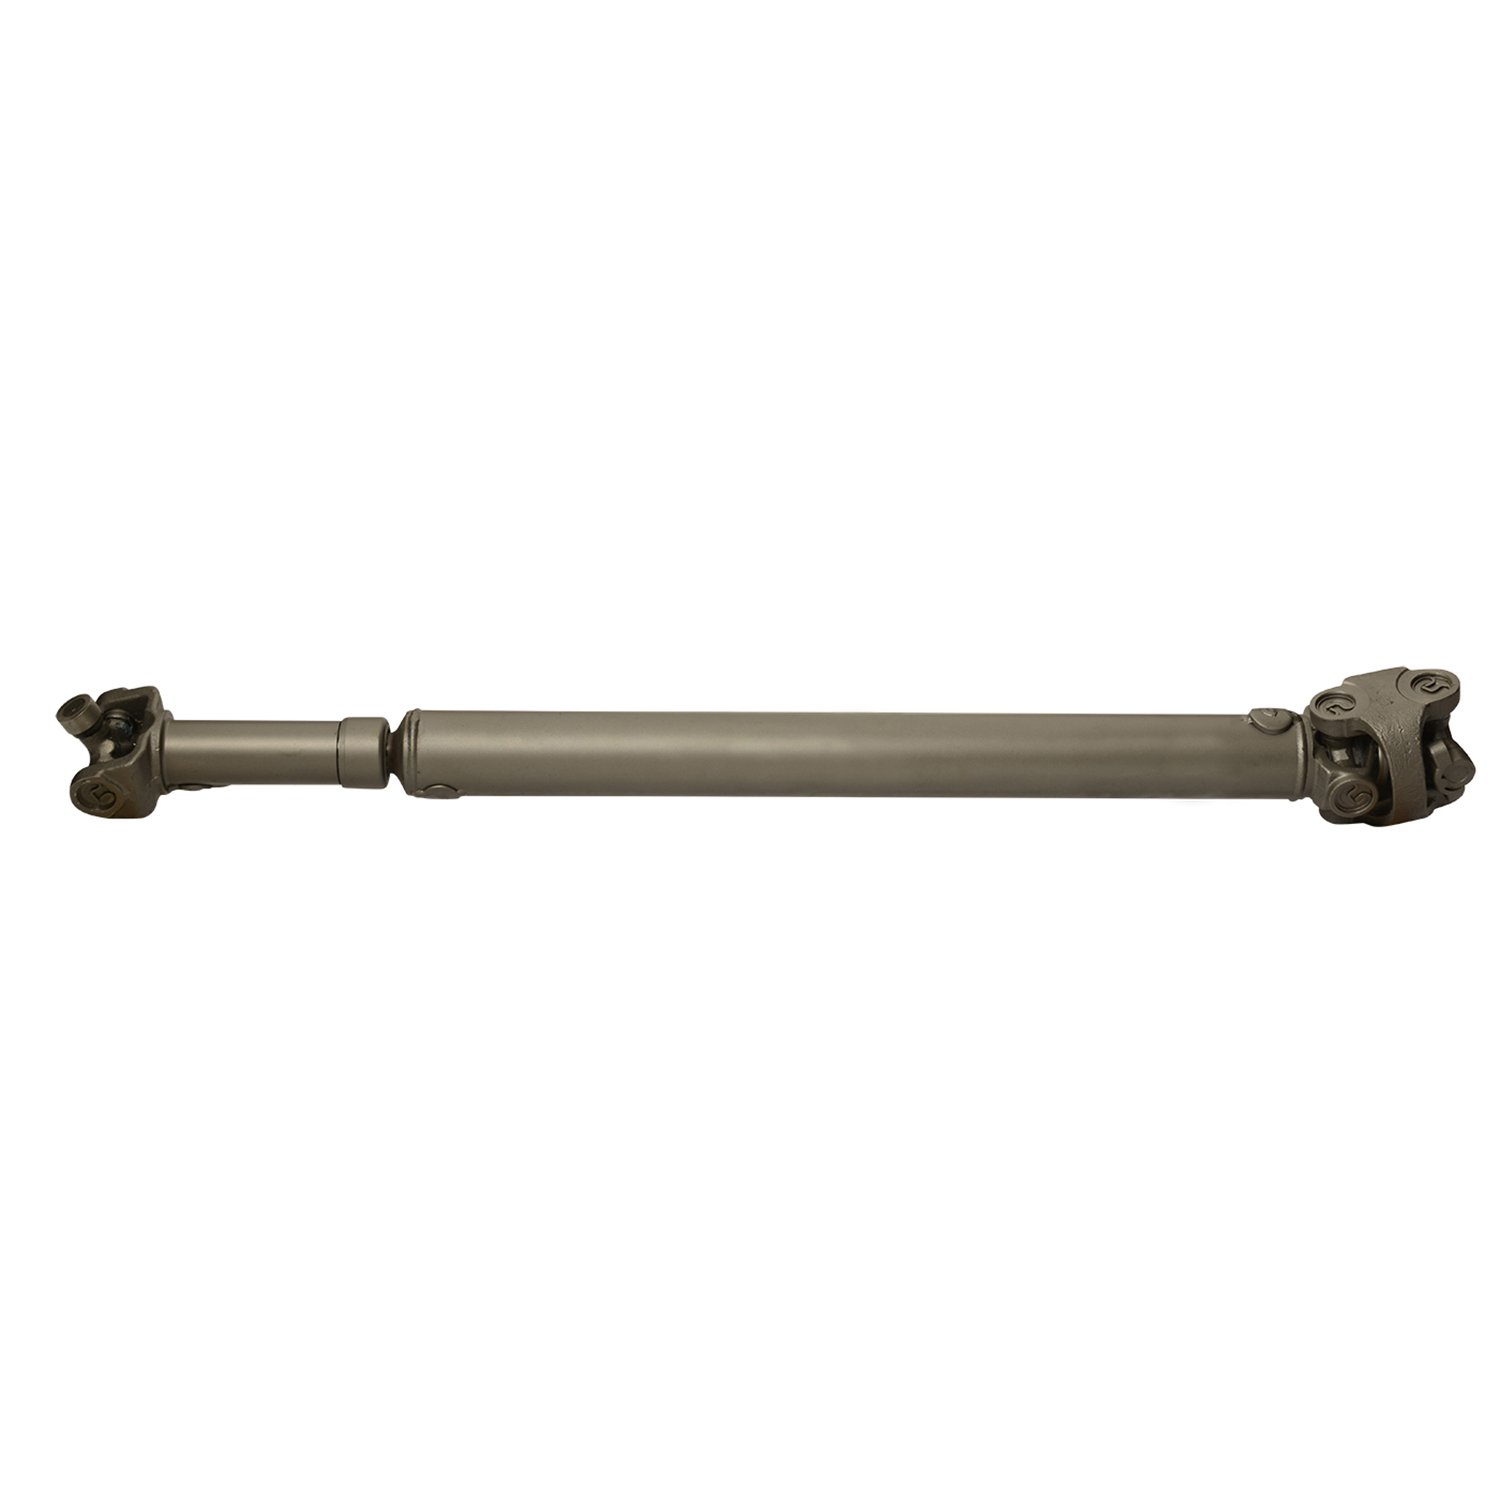 USA Standard ZDS9161 Front Driveshaft, For Bronco, F250